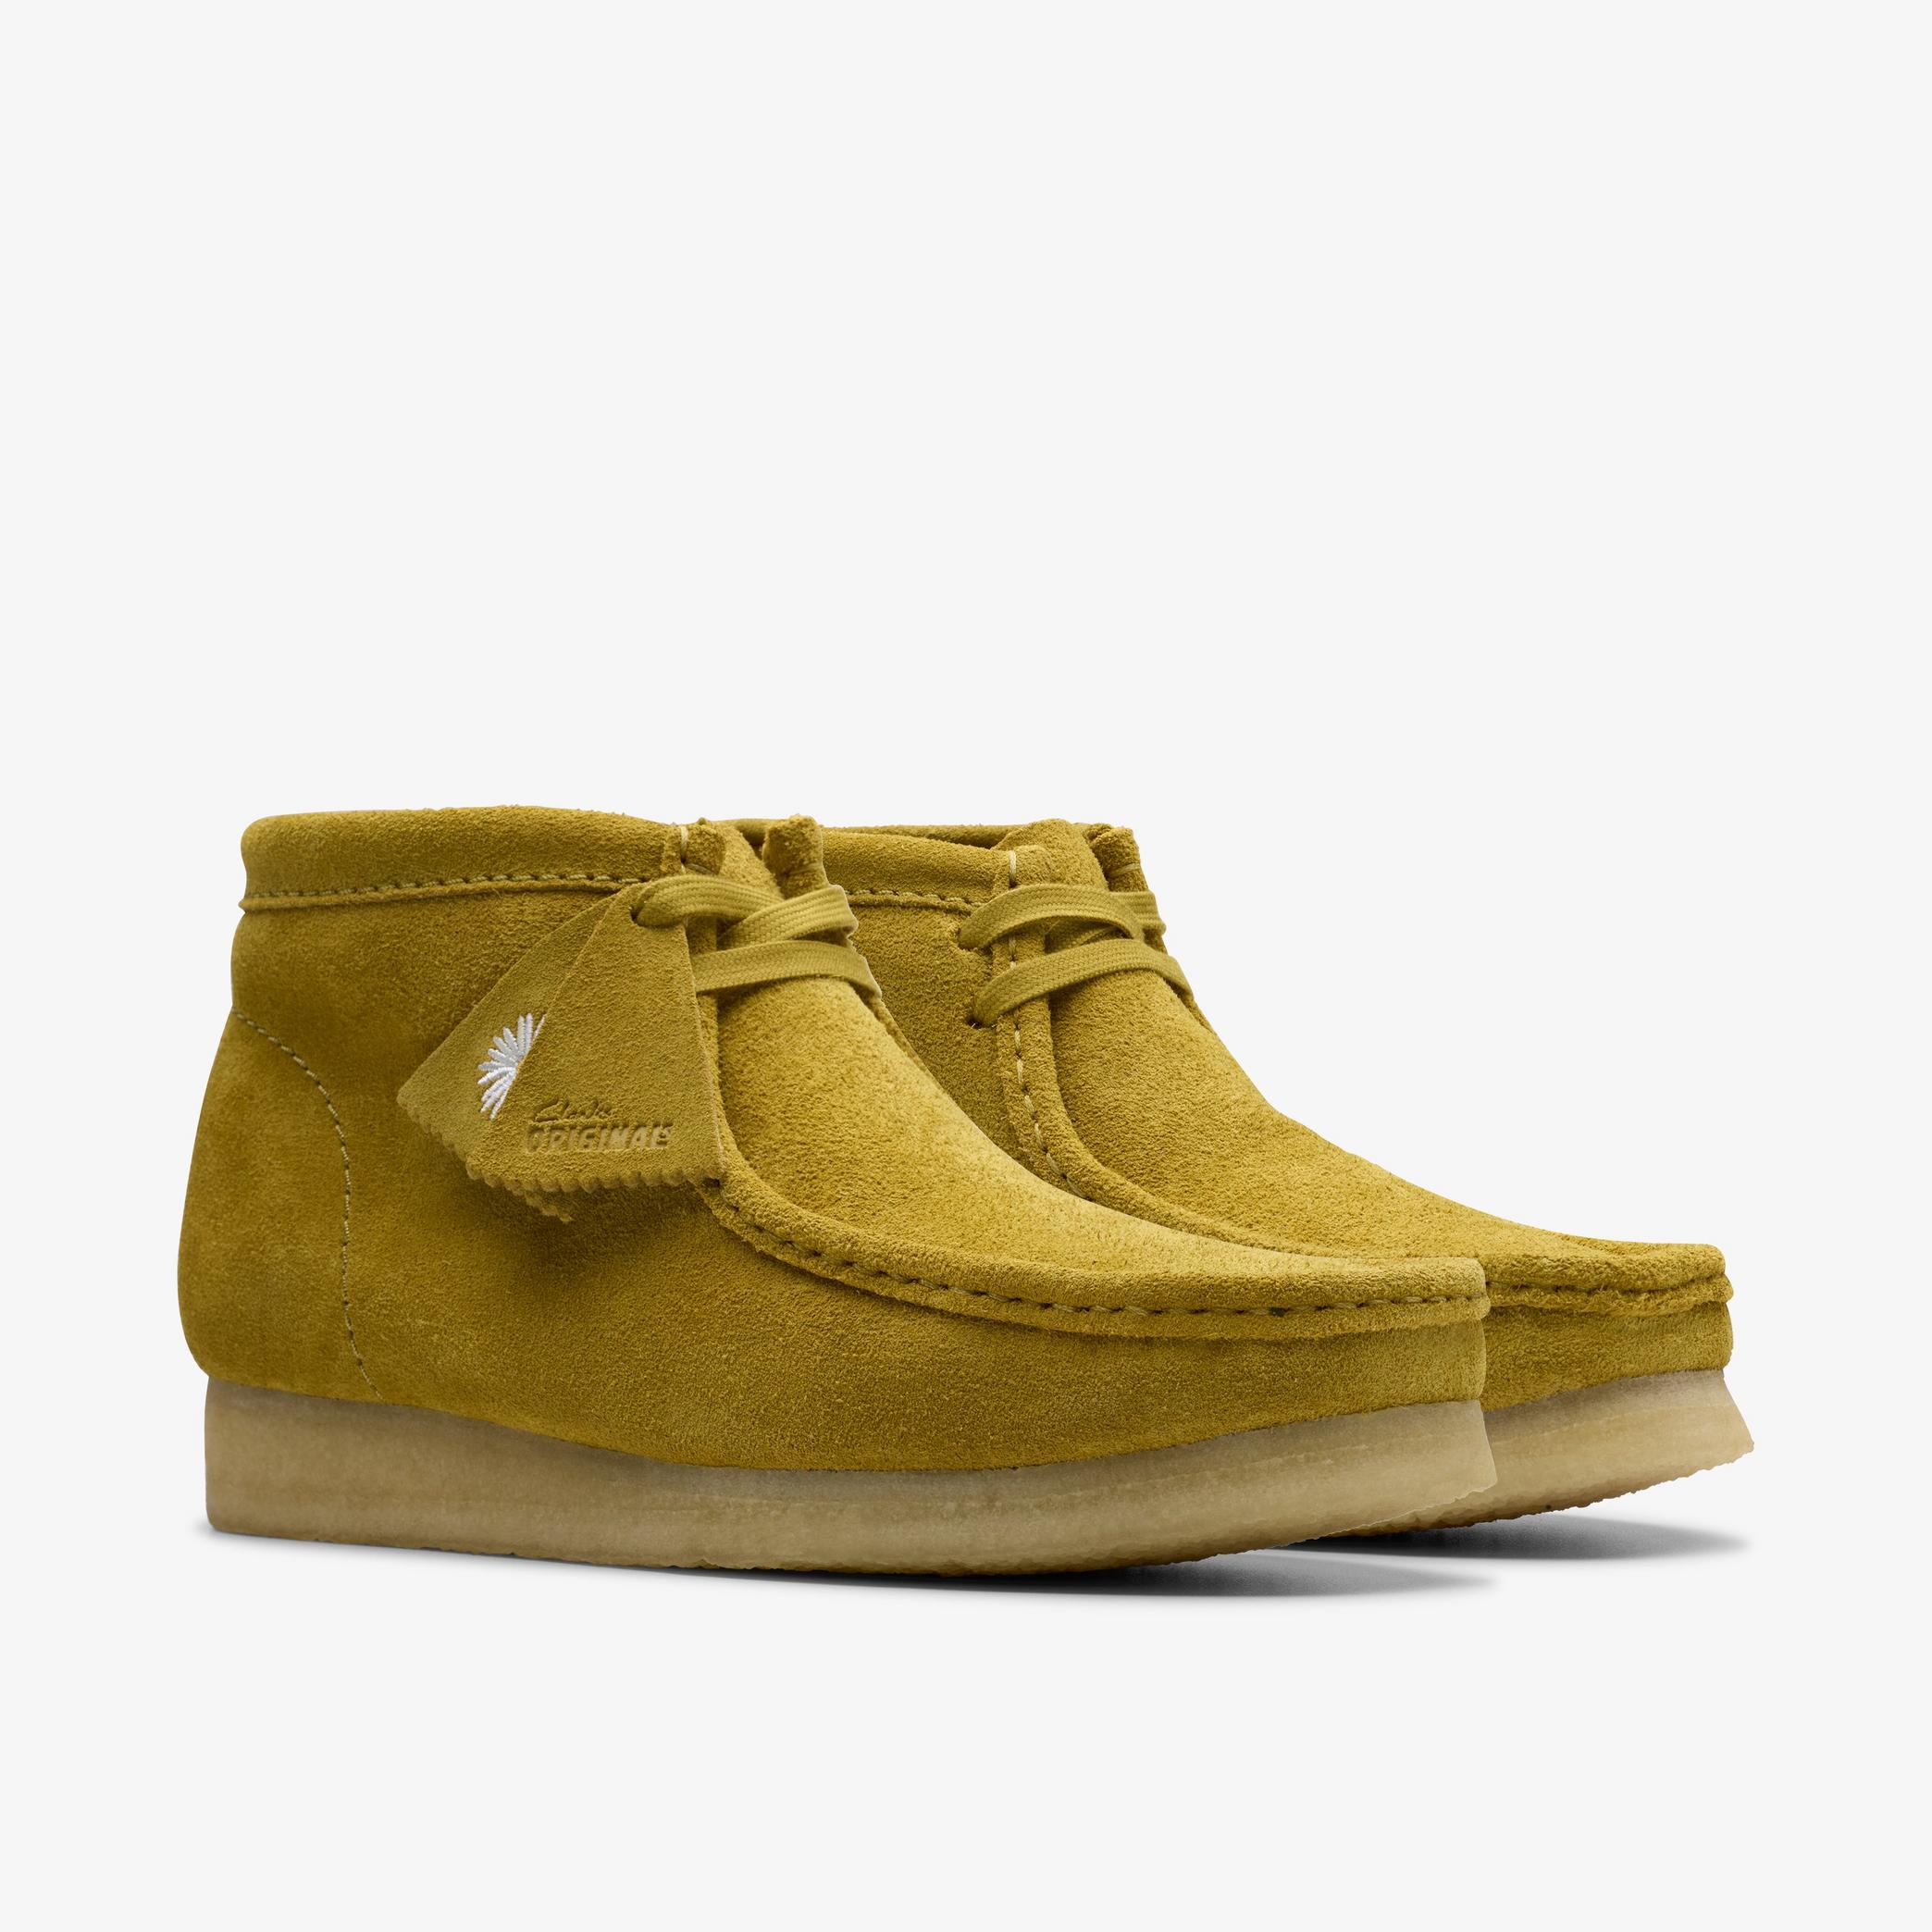 Wallabee Boot Olive Suede Wallabee, view 4 of 7